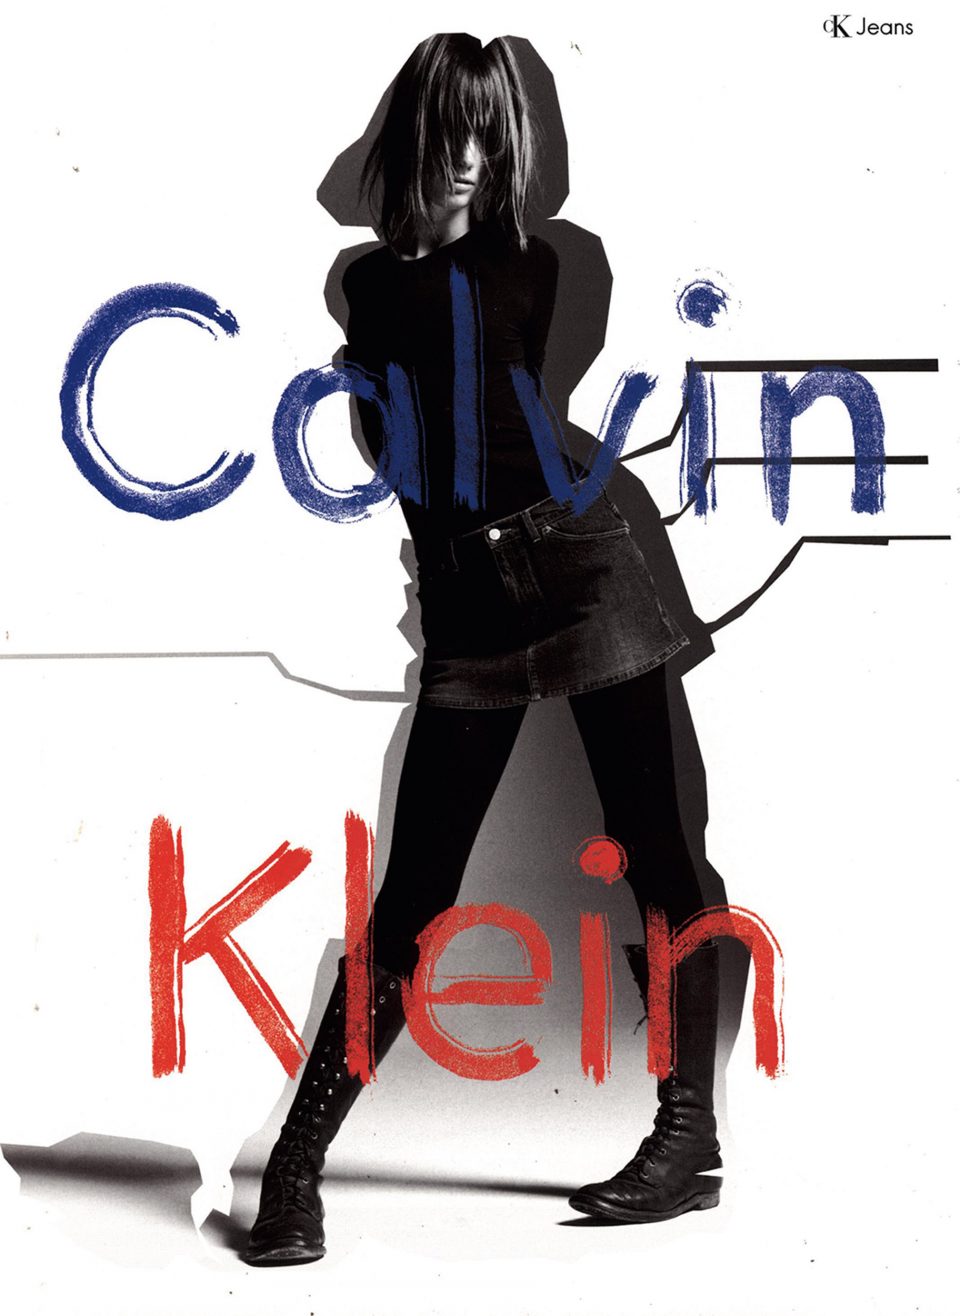 BAD2184354 Jessica Miller; (add.info.: Jessica Miller pour les vetements Calvin Klein 2002 ); EDITORIAL RIGHTS ONLY,CANNOT BE LICENSED IN THE UK; it is possible that some works by this artist may be protected by third party rights in some territories